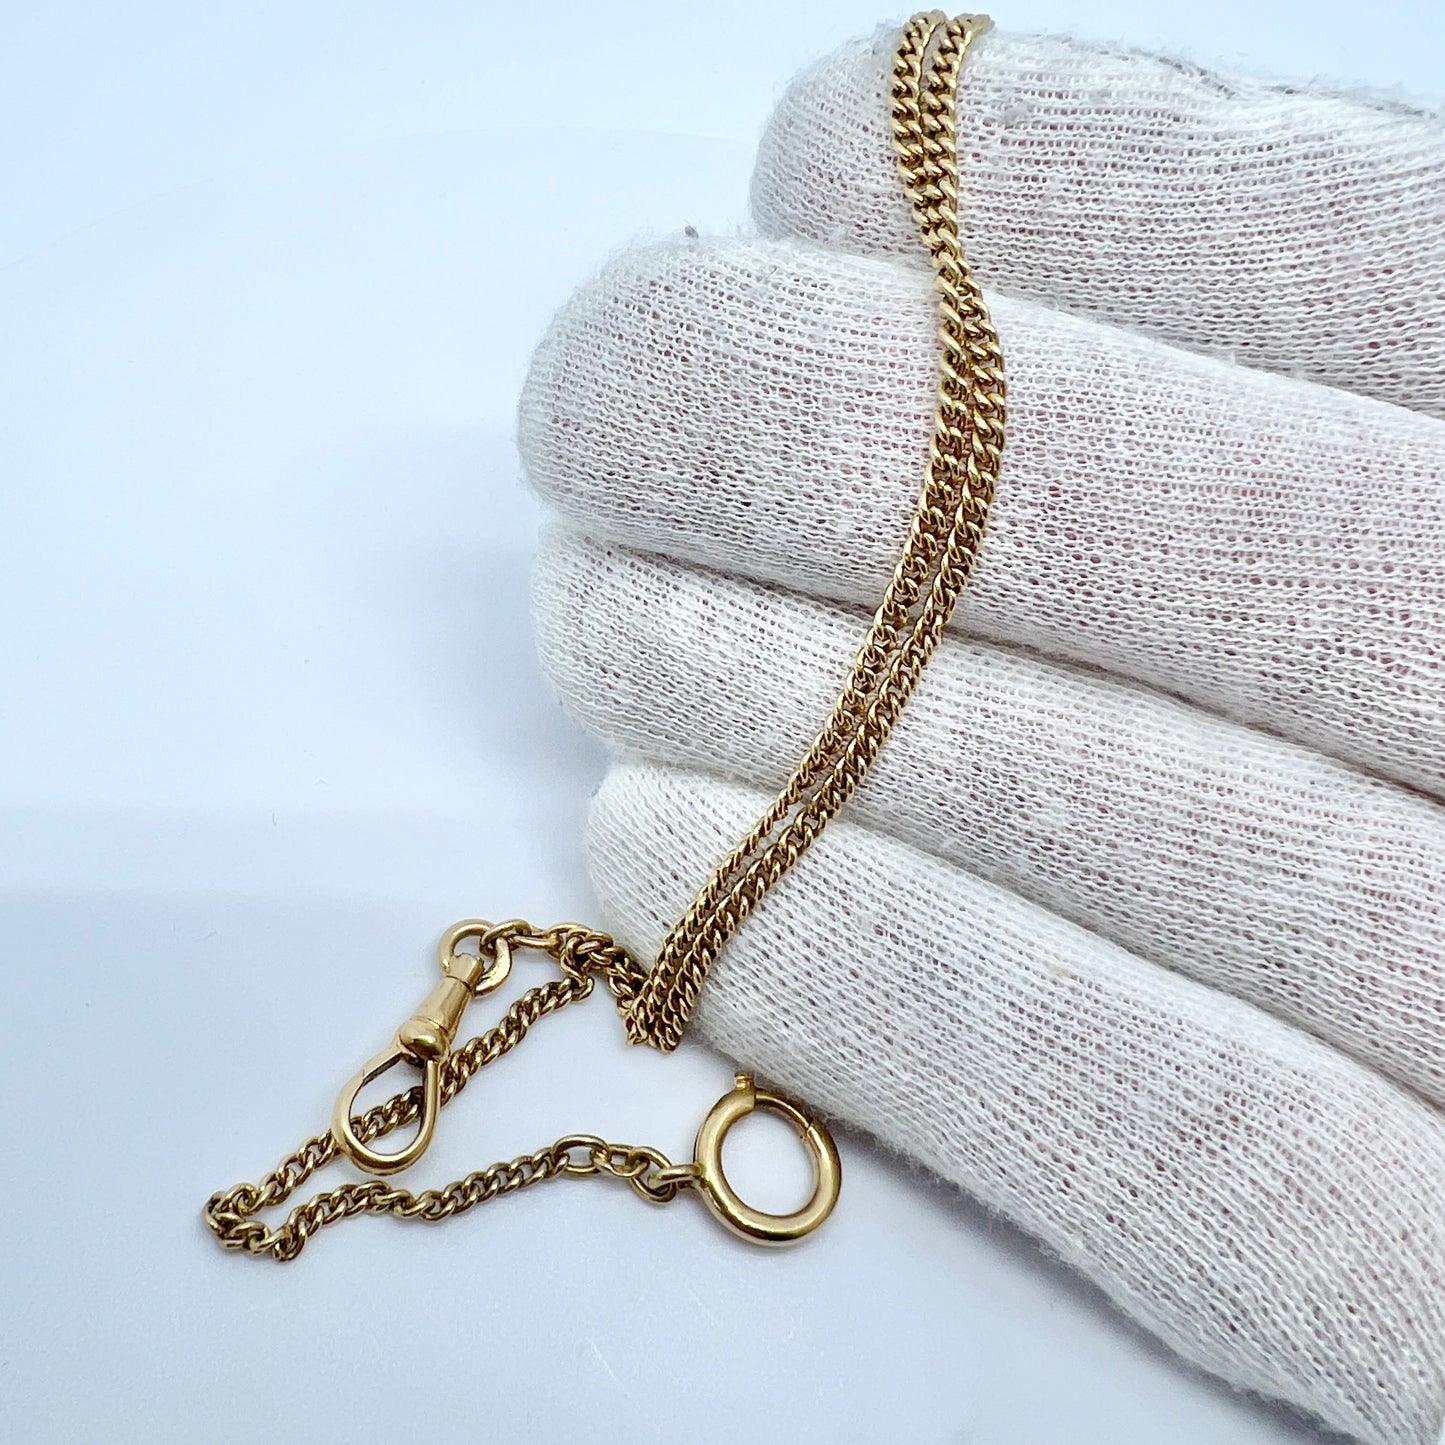 Sweden c 1900. Antique 18k Gold Watch Chain in Perfect Necklace Length.